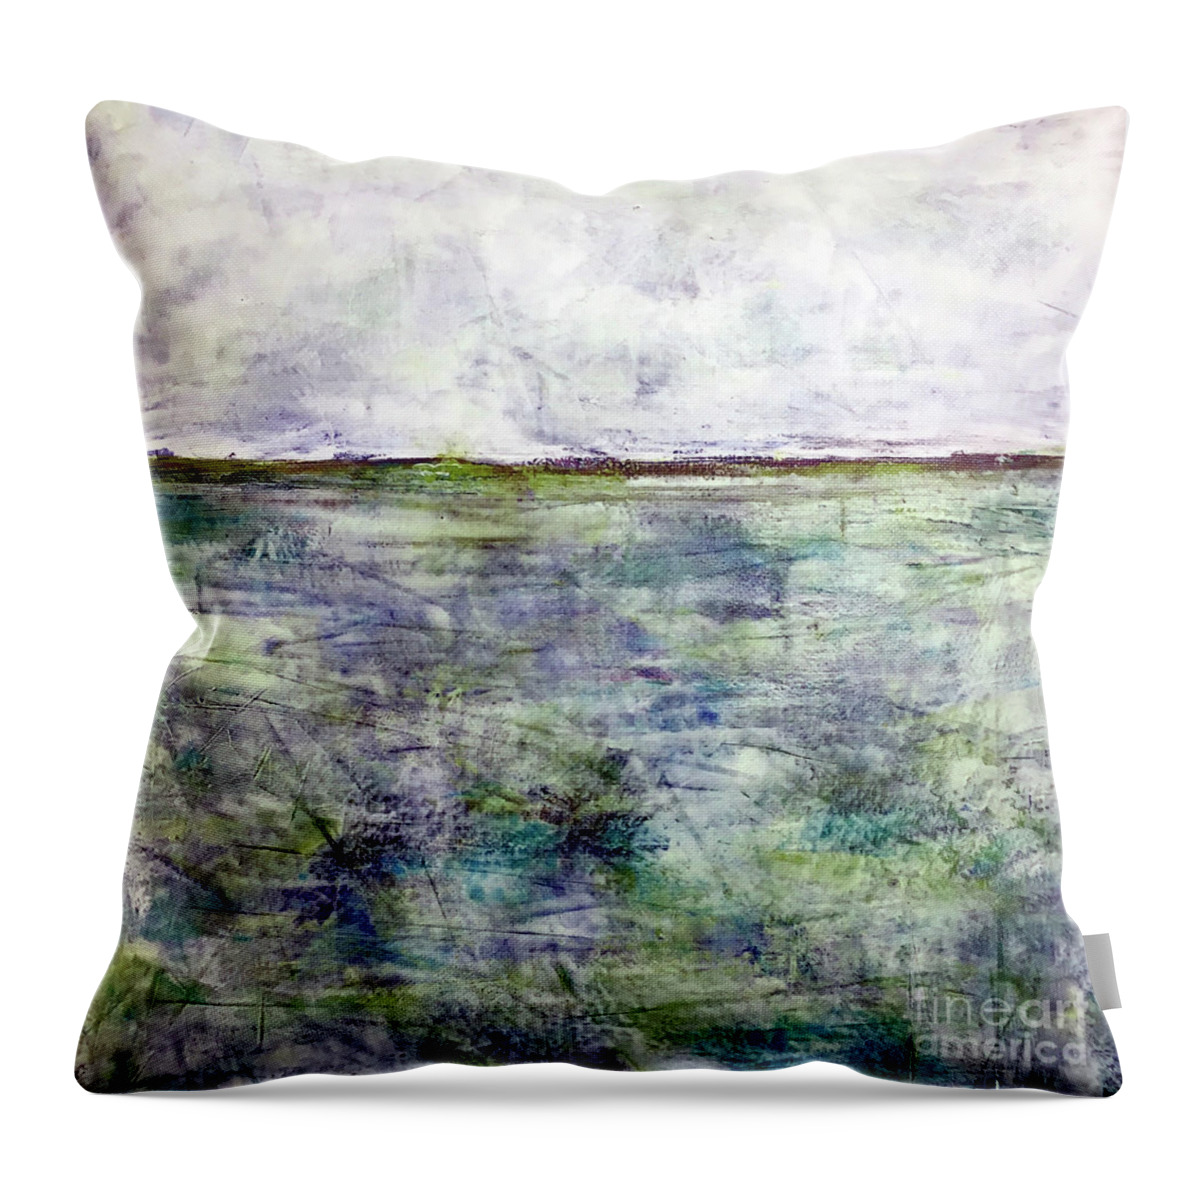 Oil Throw Pillow featuring the painting Just Another Day by Christine Chin-Fook